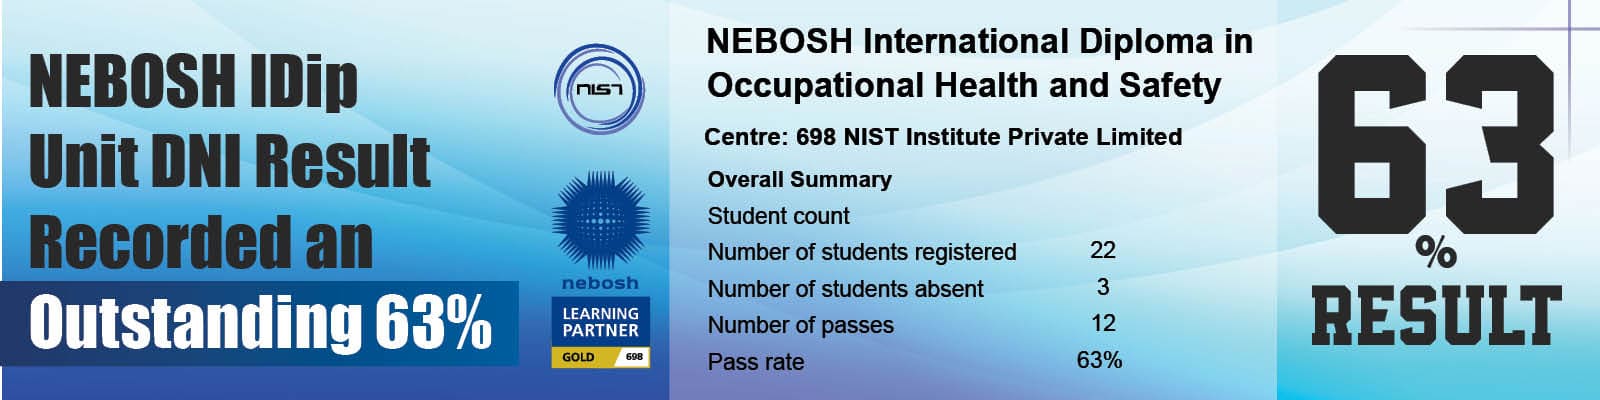 an-outstanding-result-of-63-recorded-in-nebosh-idip-unit-dni